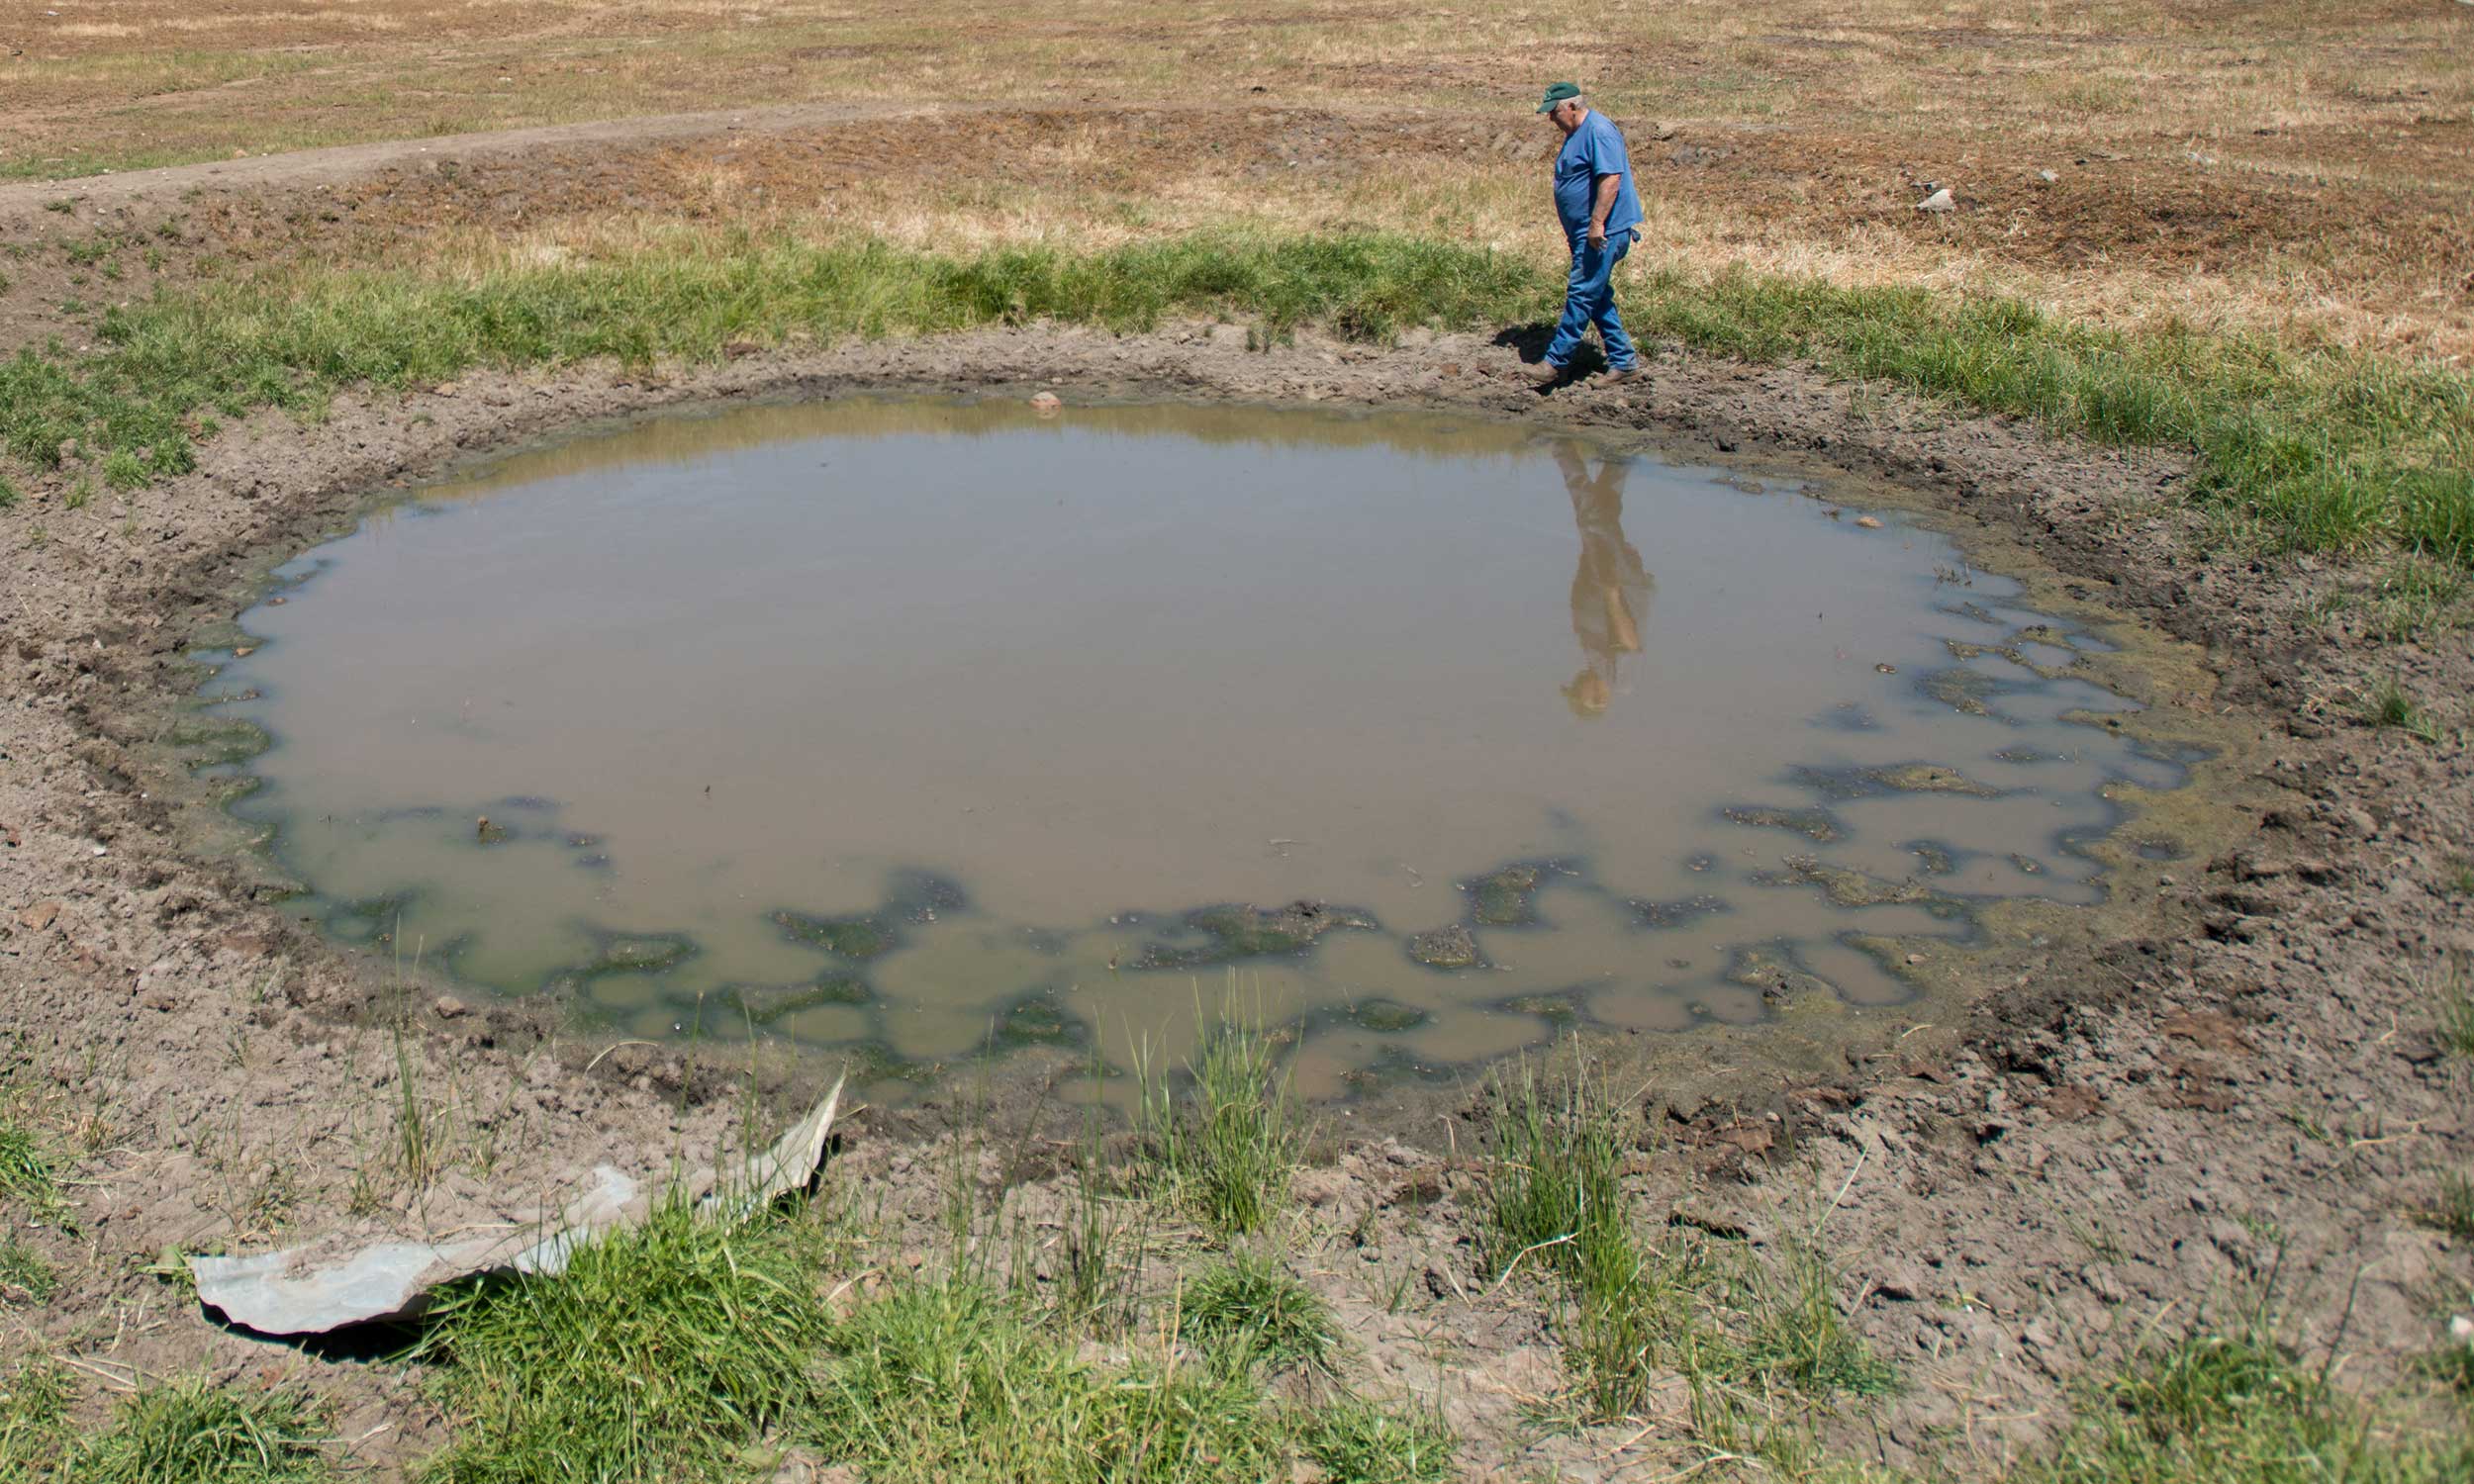 A rancher inspecting the water quality of a small stock pond.